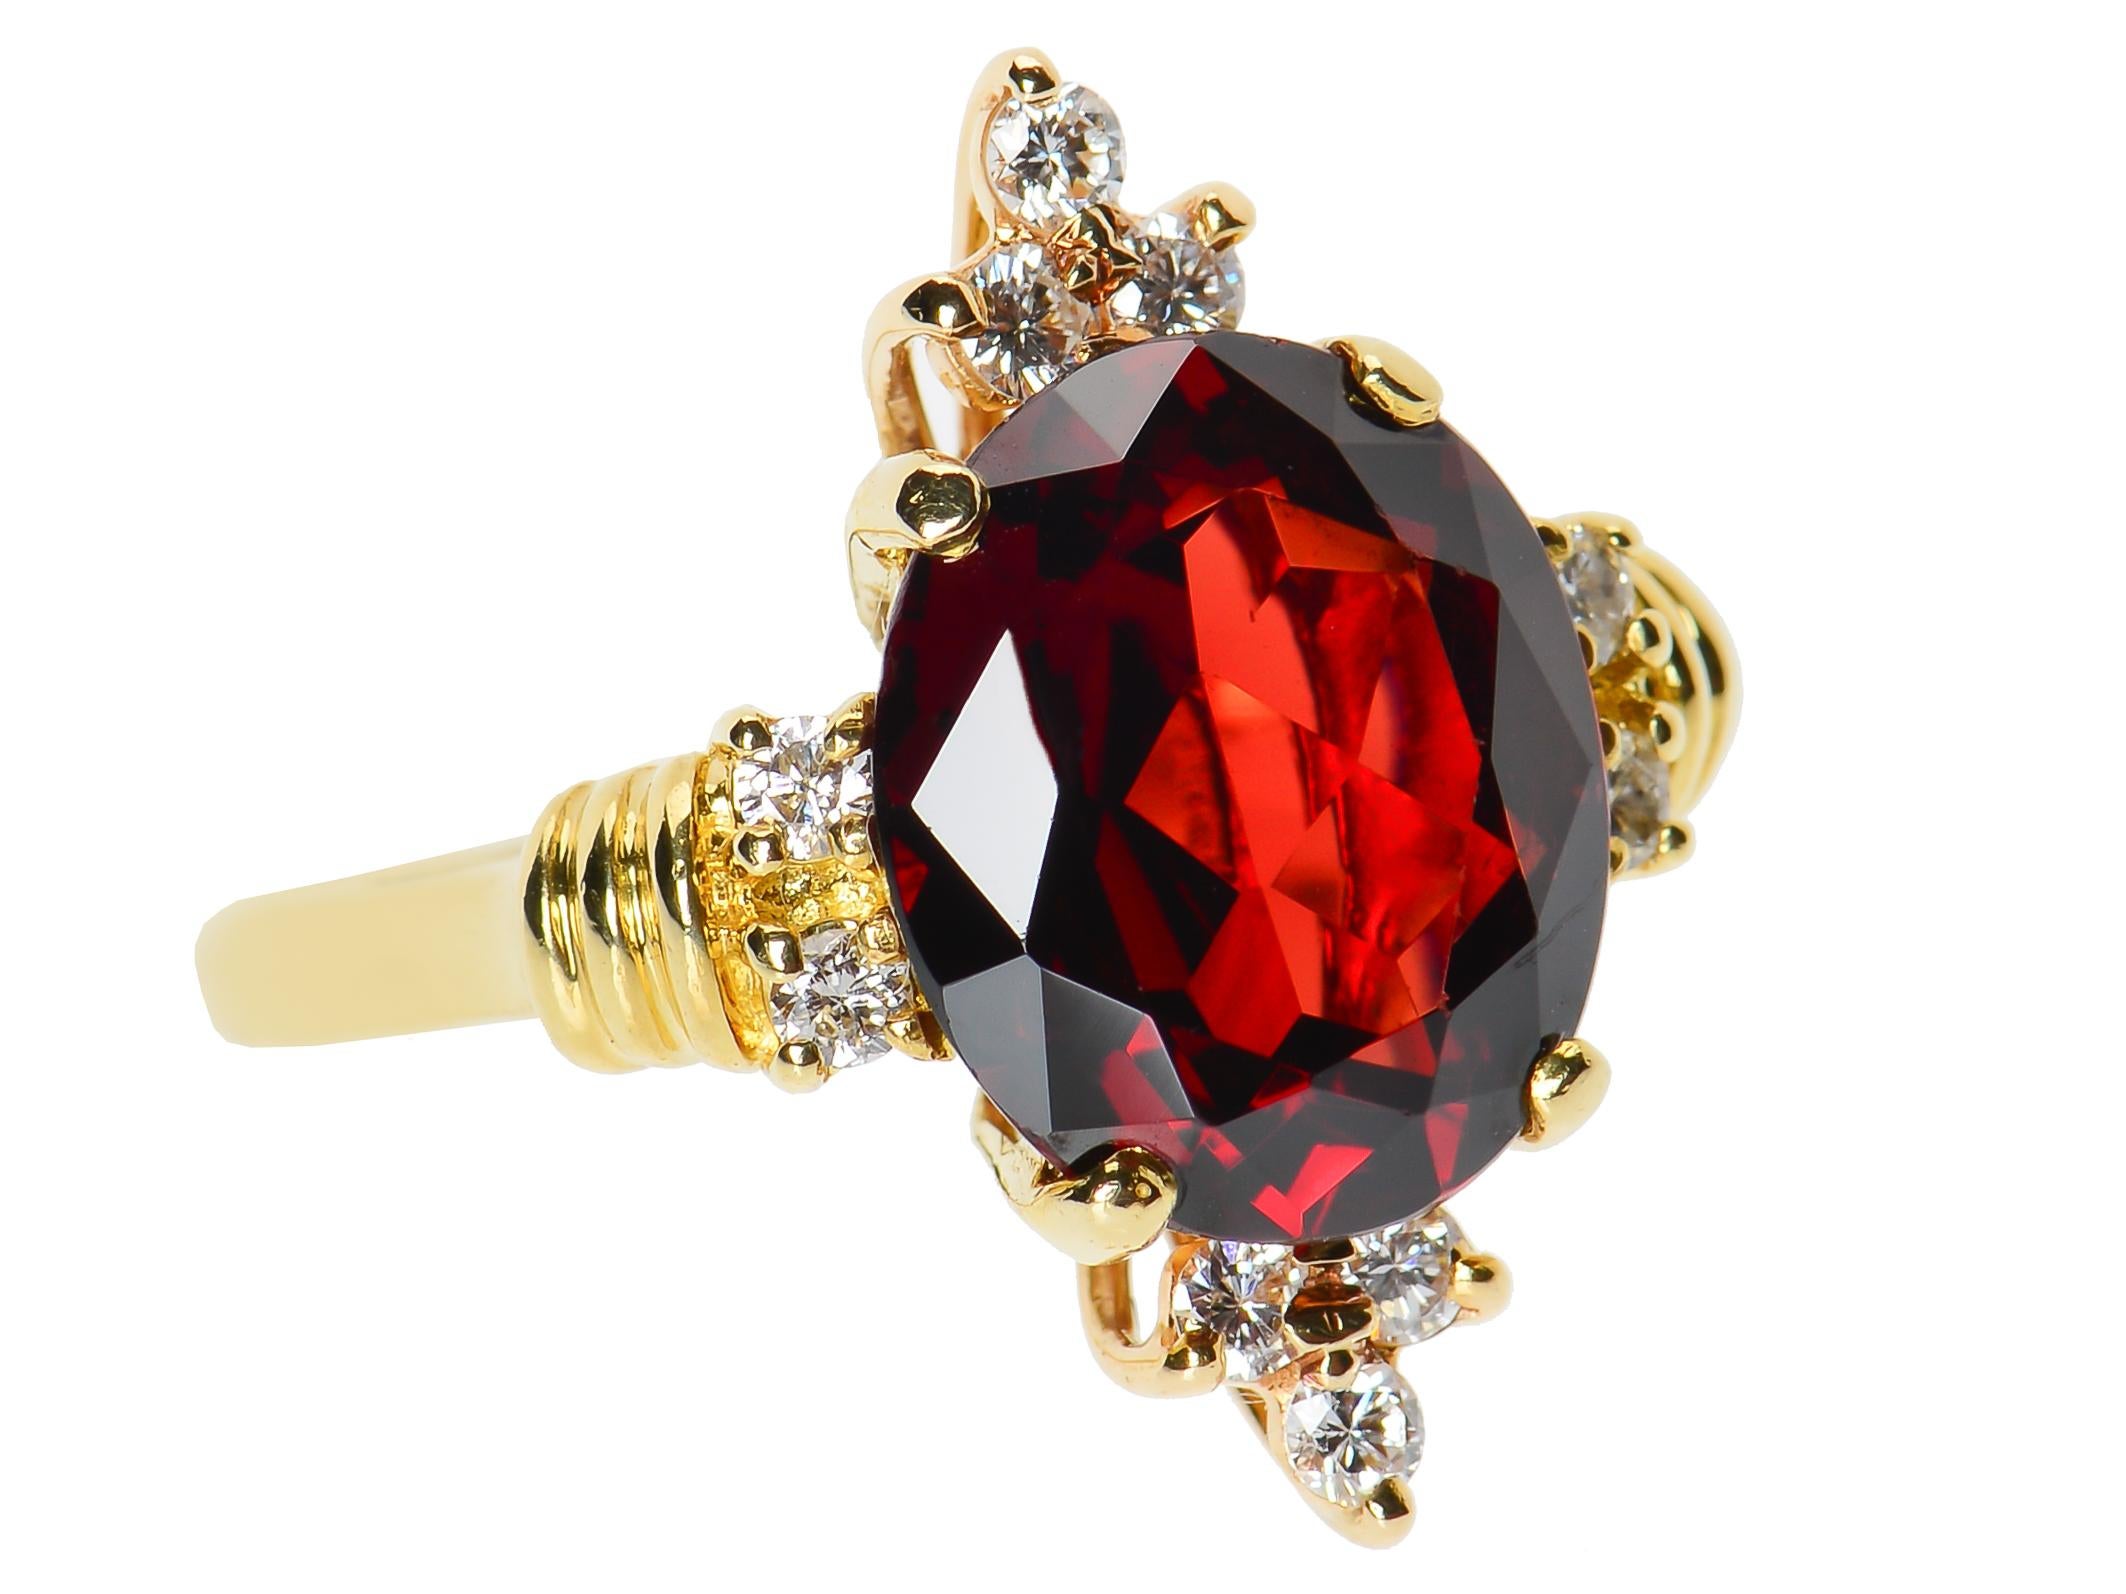 Vintage Estate 18 Karat Garnet and Diamond Ring In Excellent Condition For Sale In Stamford, CT